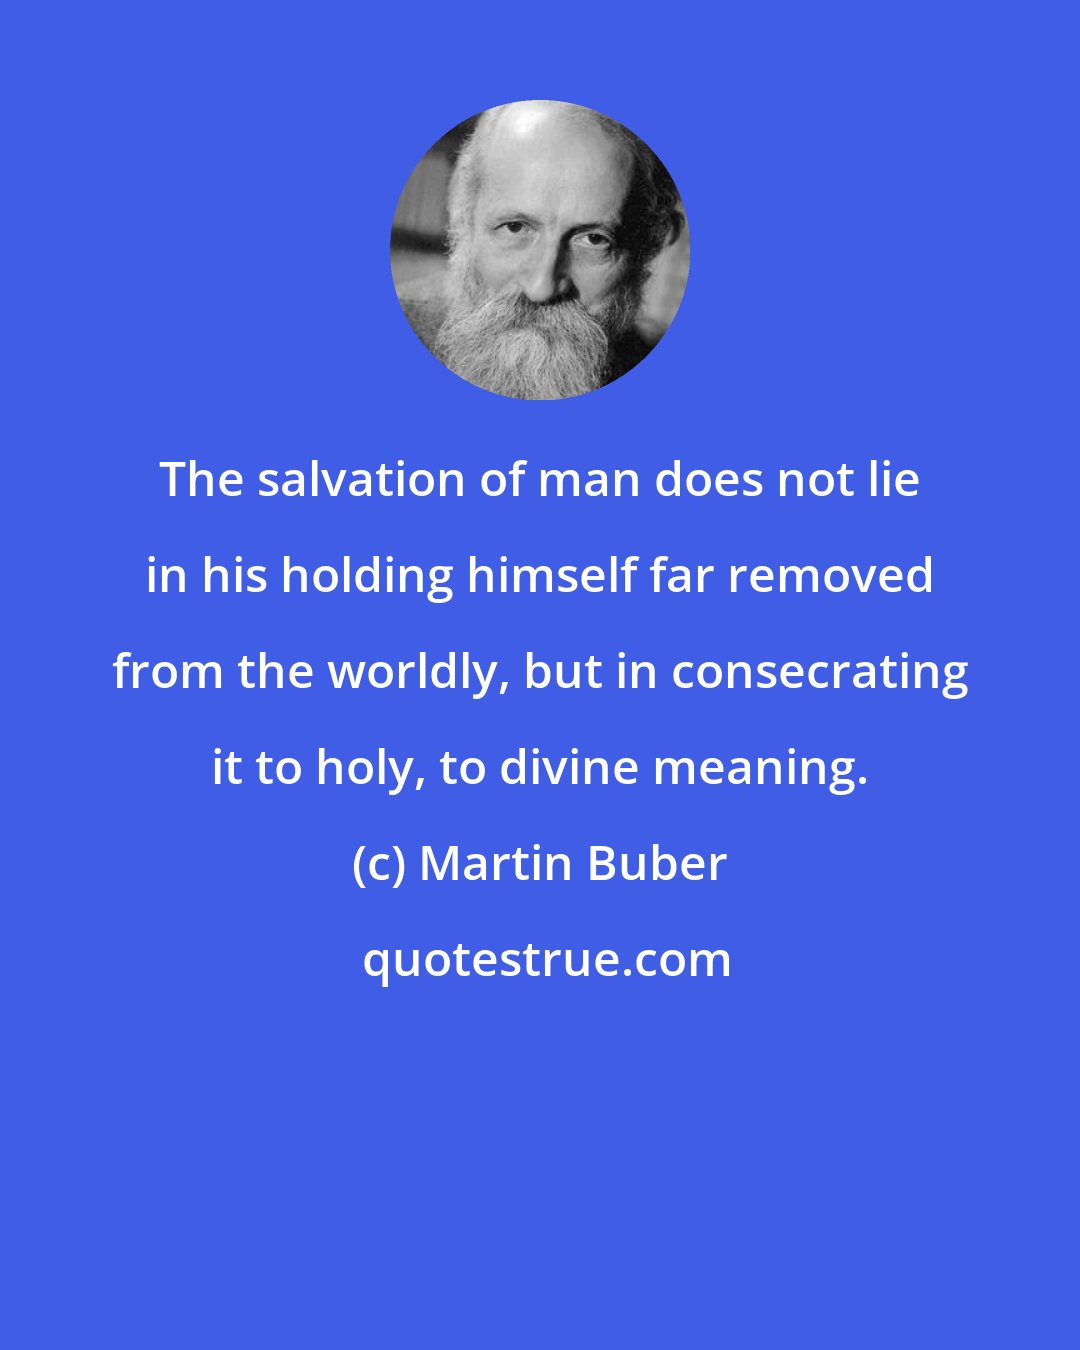 Martin Buber: The salvation of man does not lie in his holding himself far removed from the worldly, but in consecrating it to holy, to divine meaning.